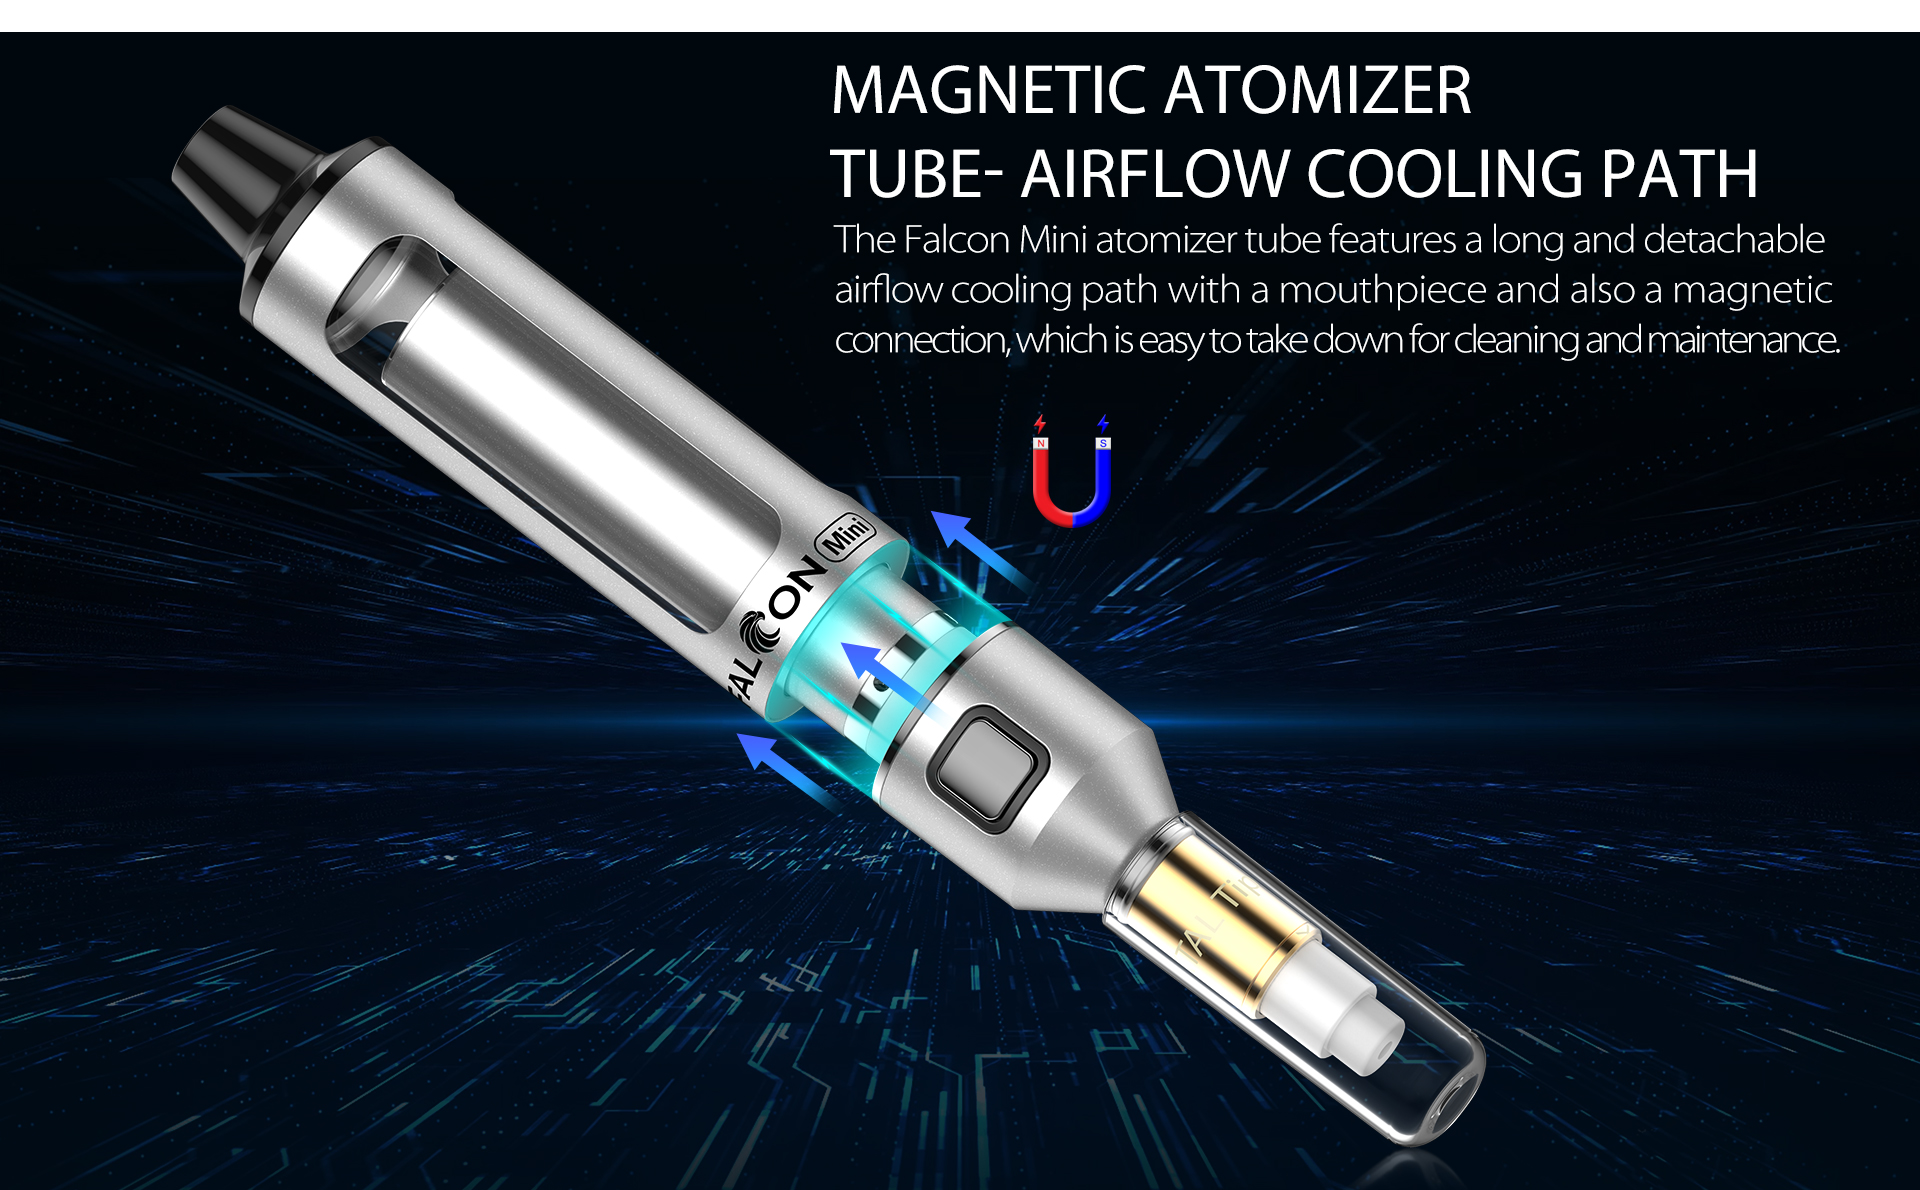 The Yocan Falcon Mini Vaporizer Pen comes with a magnetic atomizer tube airflow cooling path.